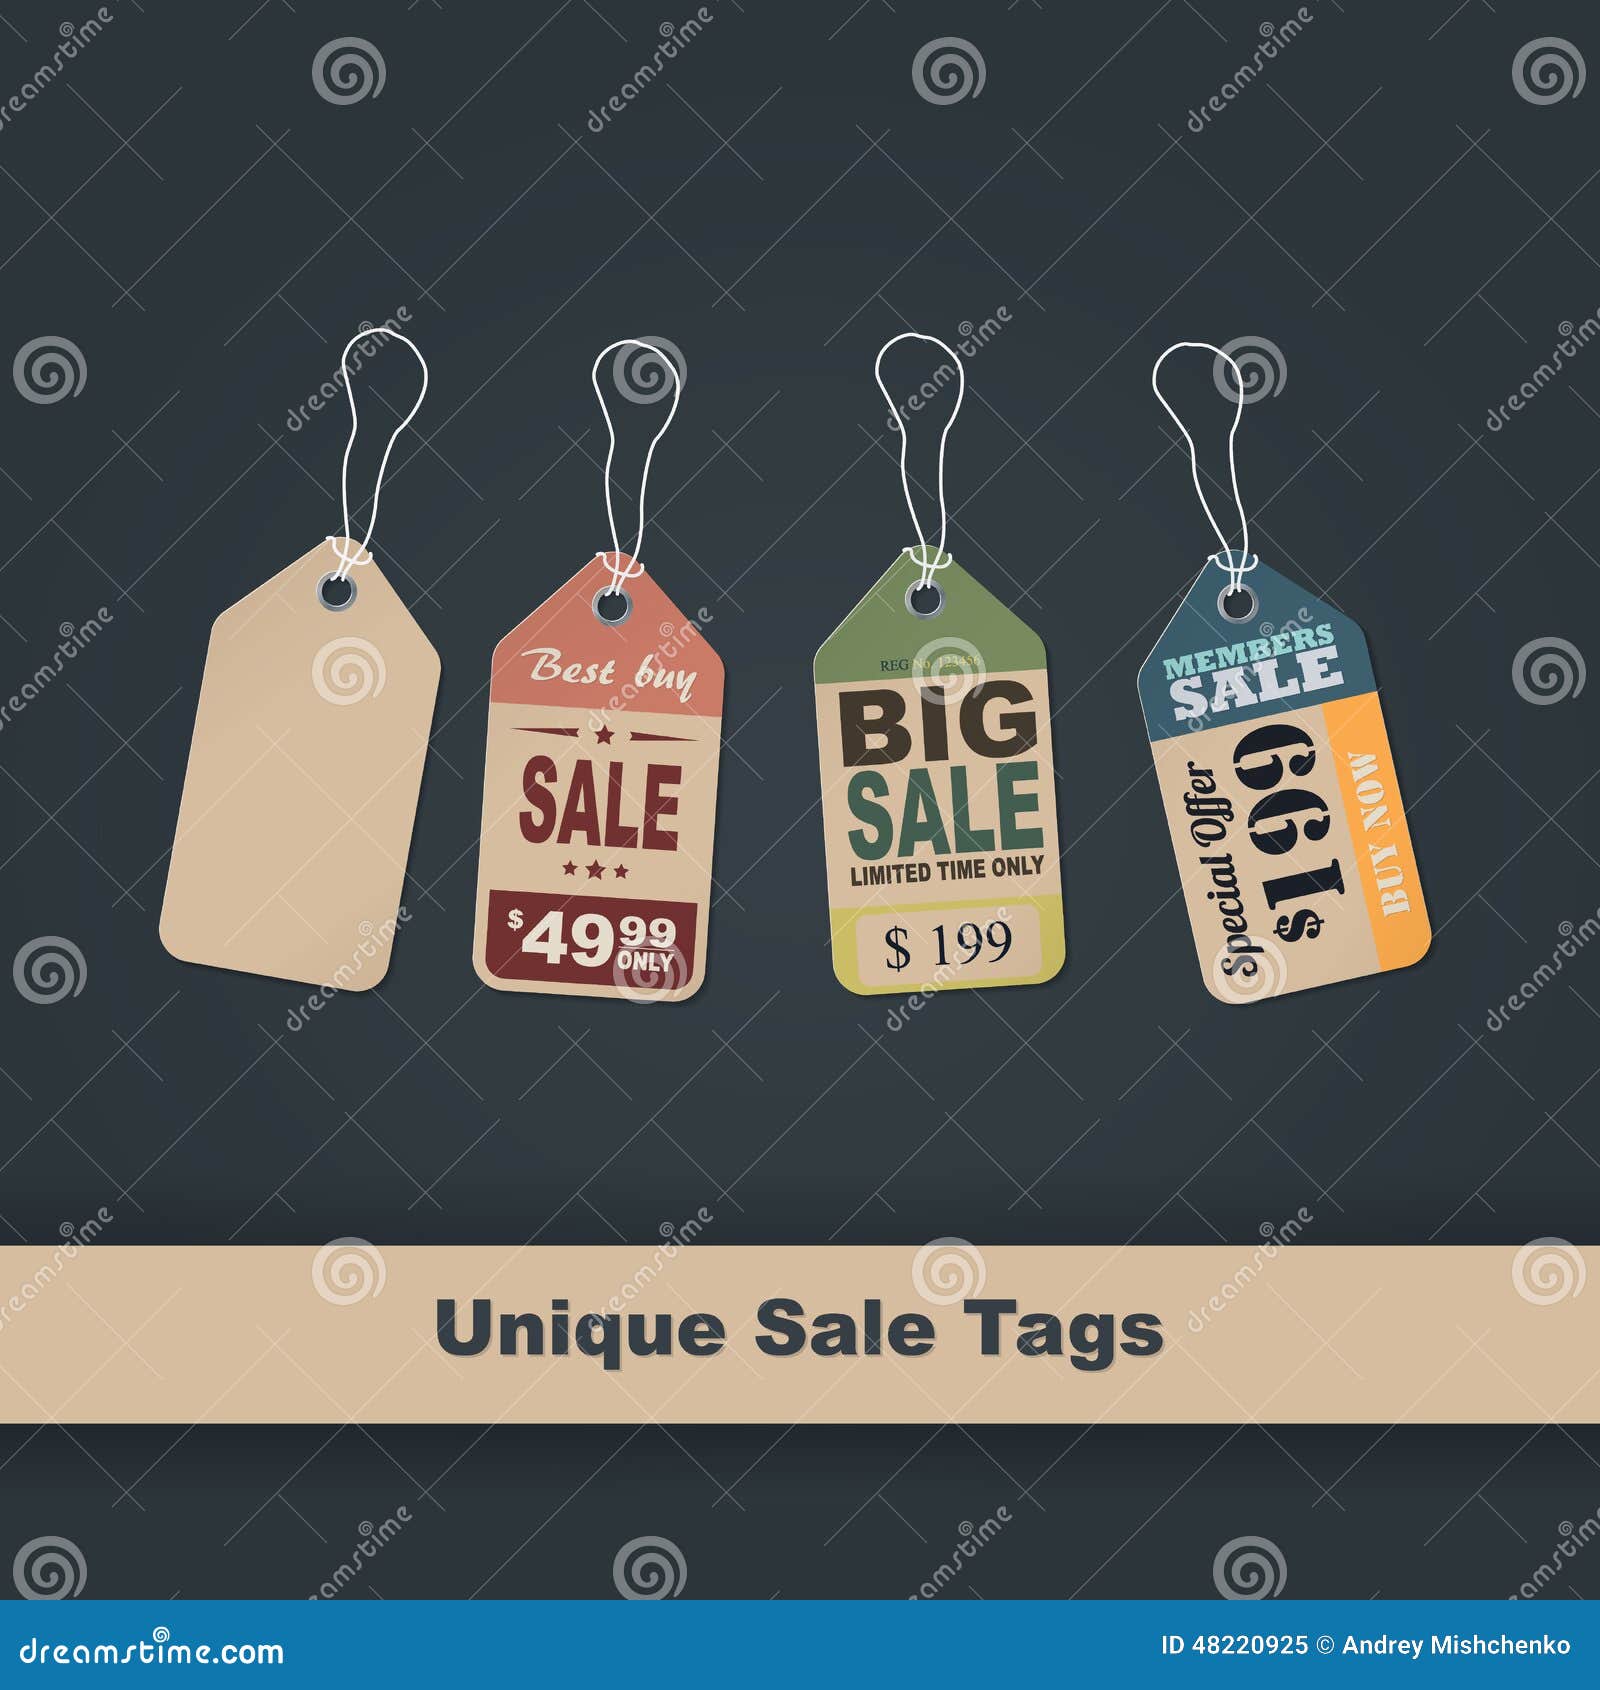 Vintage Retail Tags Stock Illustration - Download Image Now